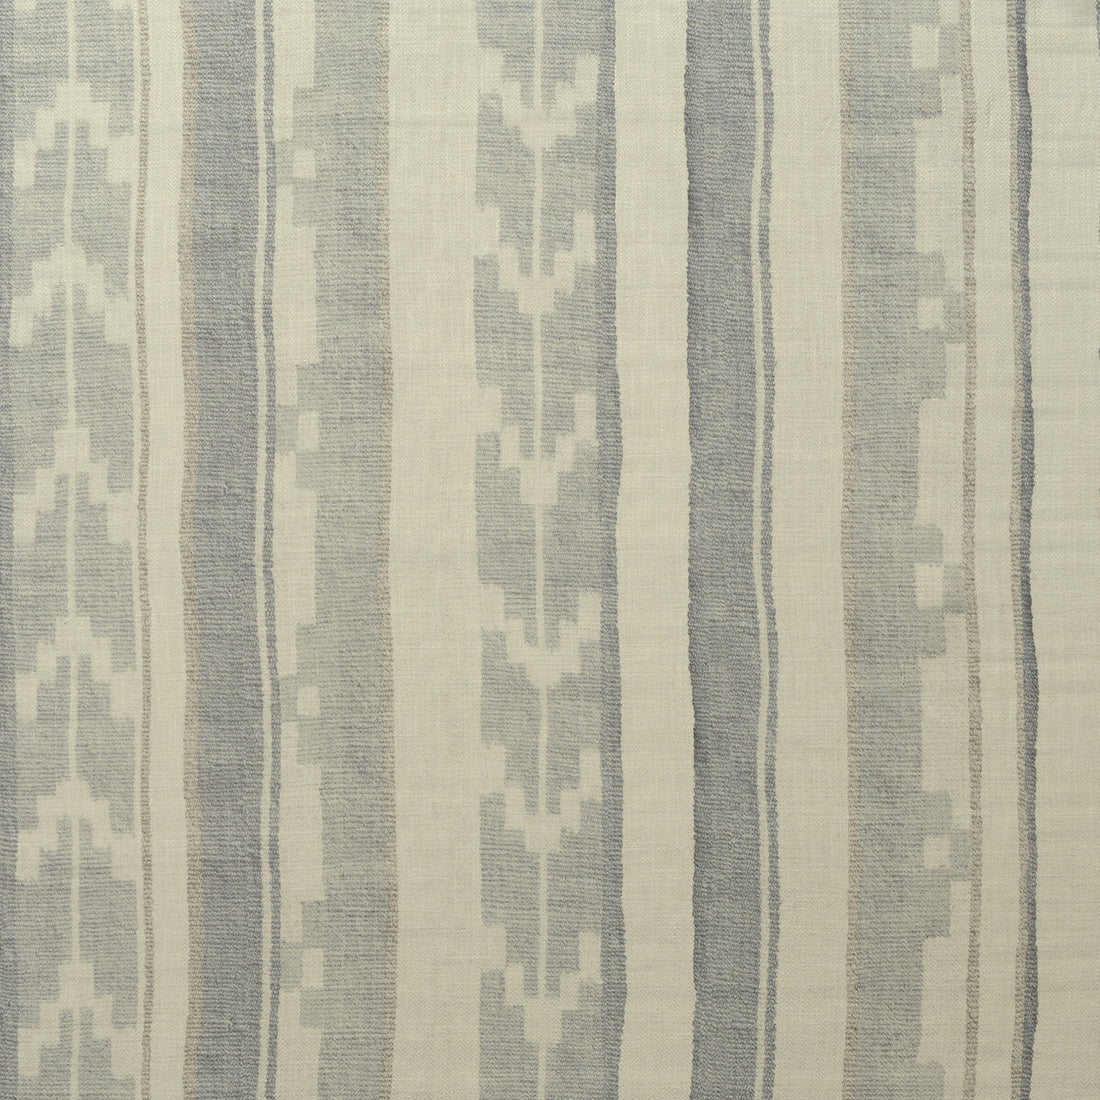 Indus fabric in cloud color - pattern AM100338.11.0 - by Kravet Couture in the Andrew Martin Hindukush collection